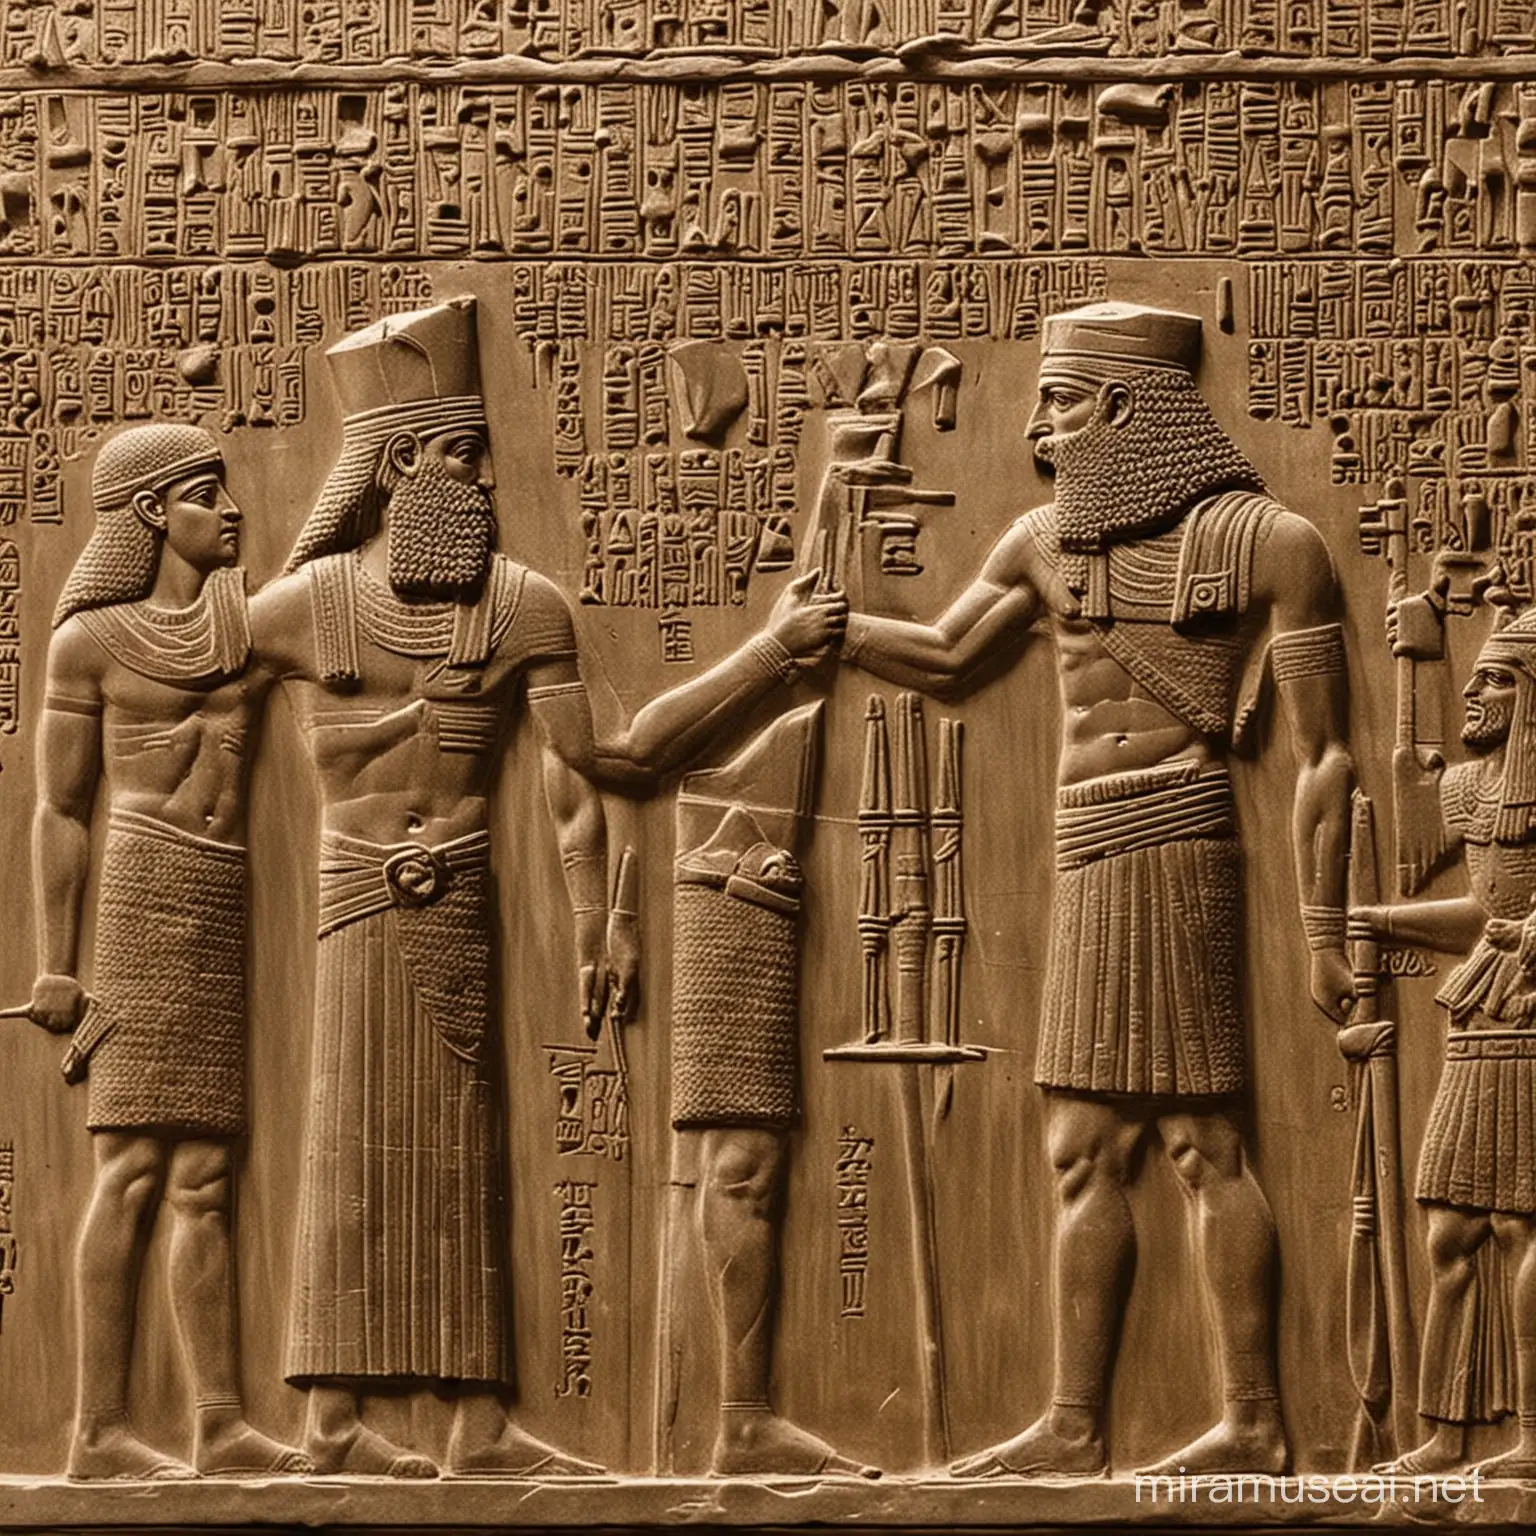 Babylonian code of hammurabi allowing father to killed his son